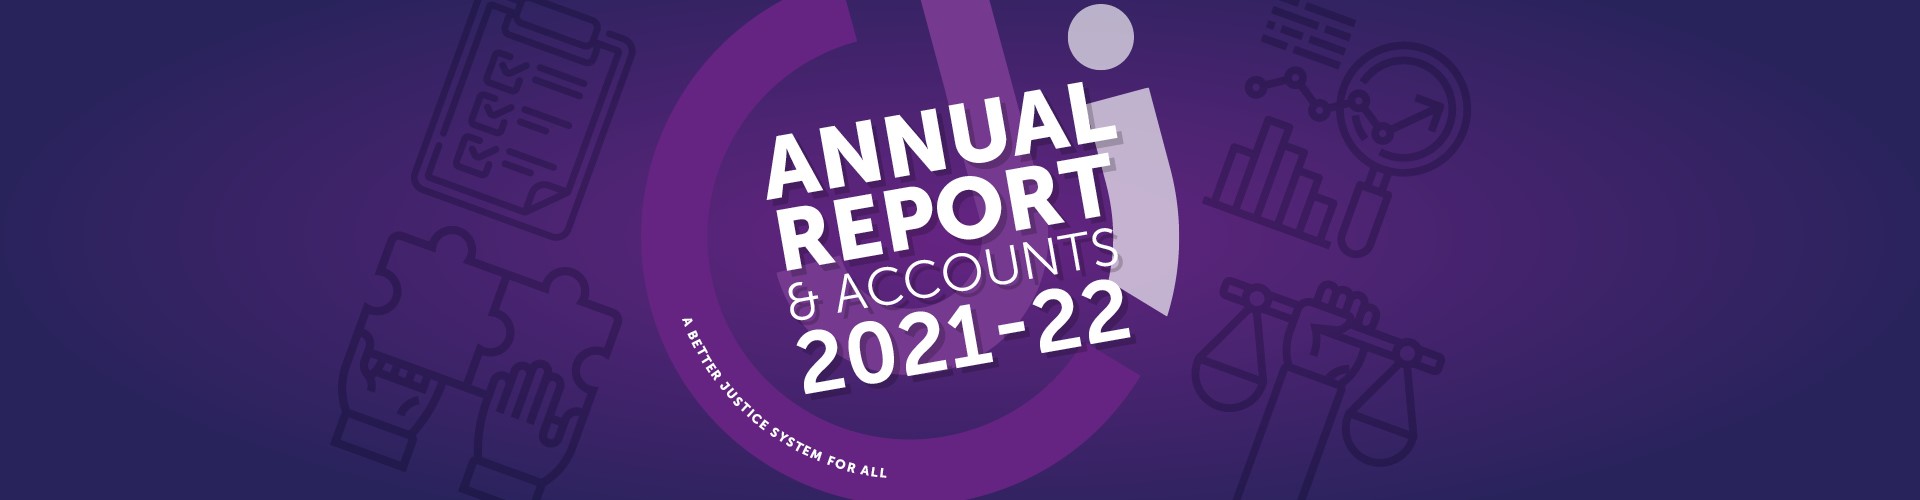 Graphic image of CJI Annual Report and Accounts 2021-22